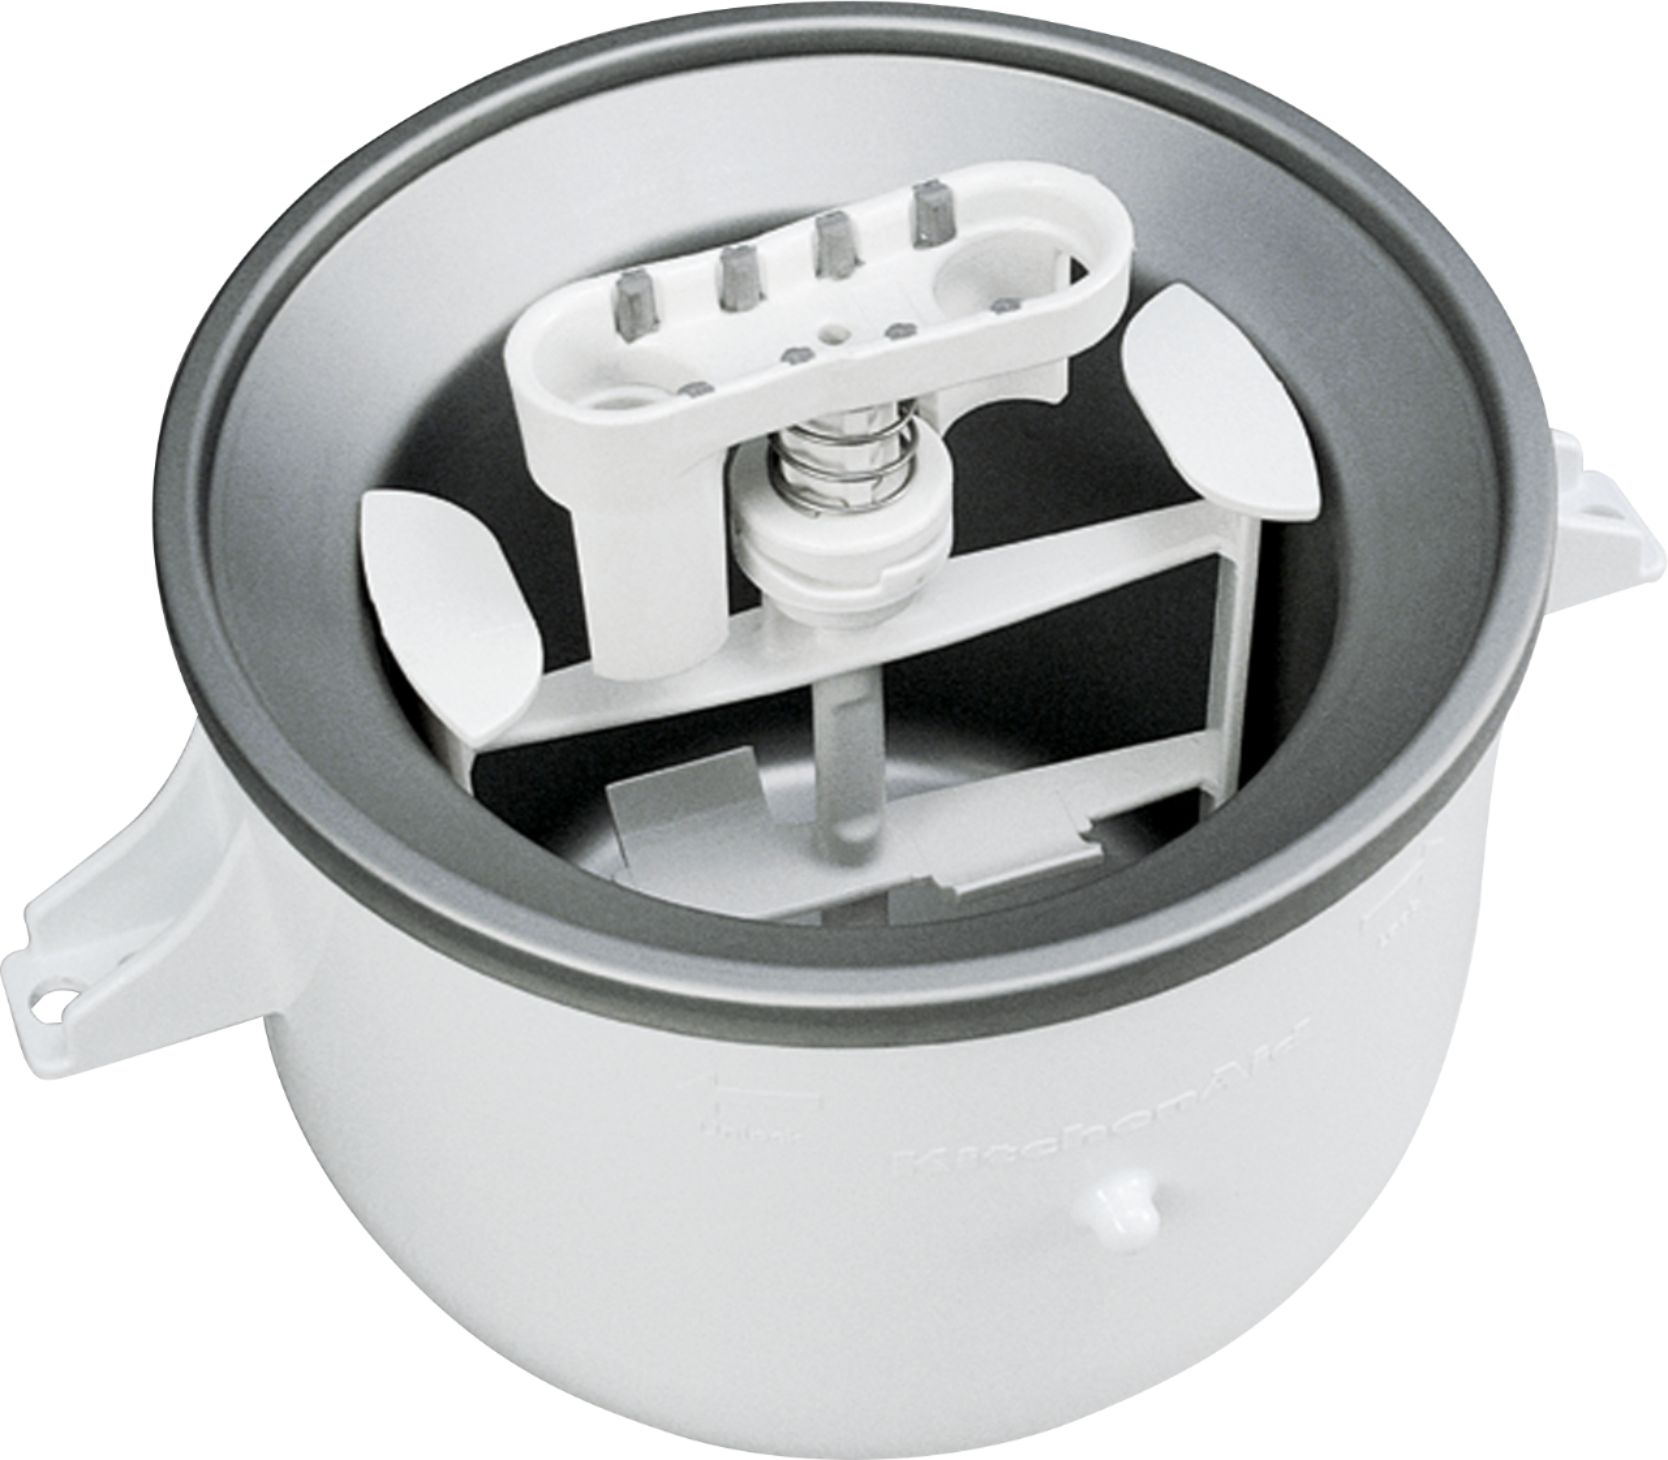 Best Buy: KICA0WH Ice Cream Maker for Most KitchenAid Stand Mixers KICA0WH